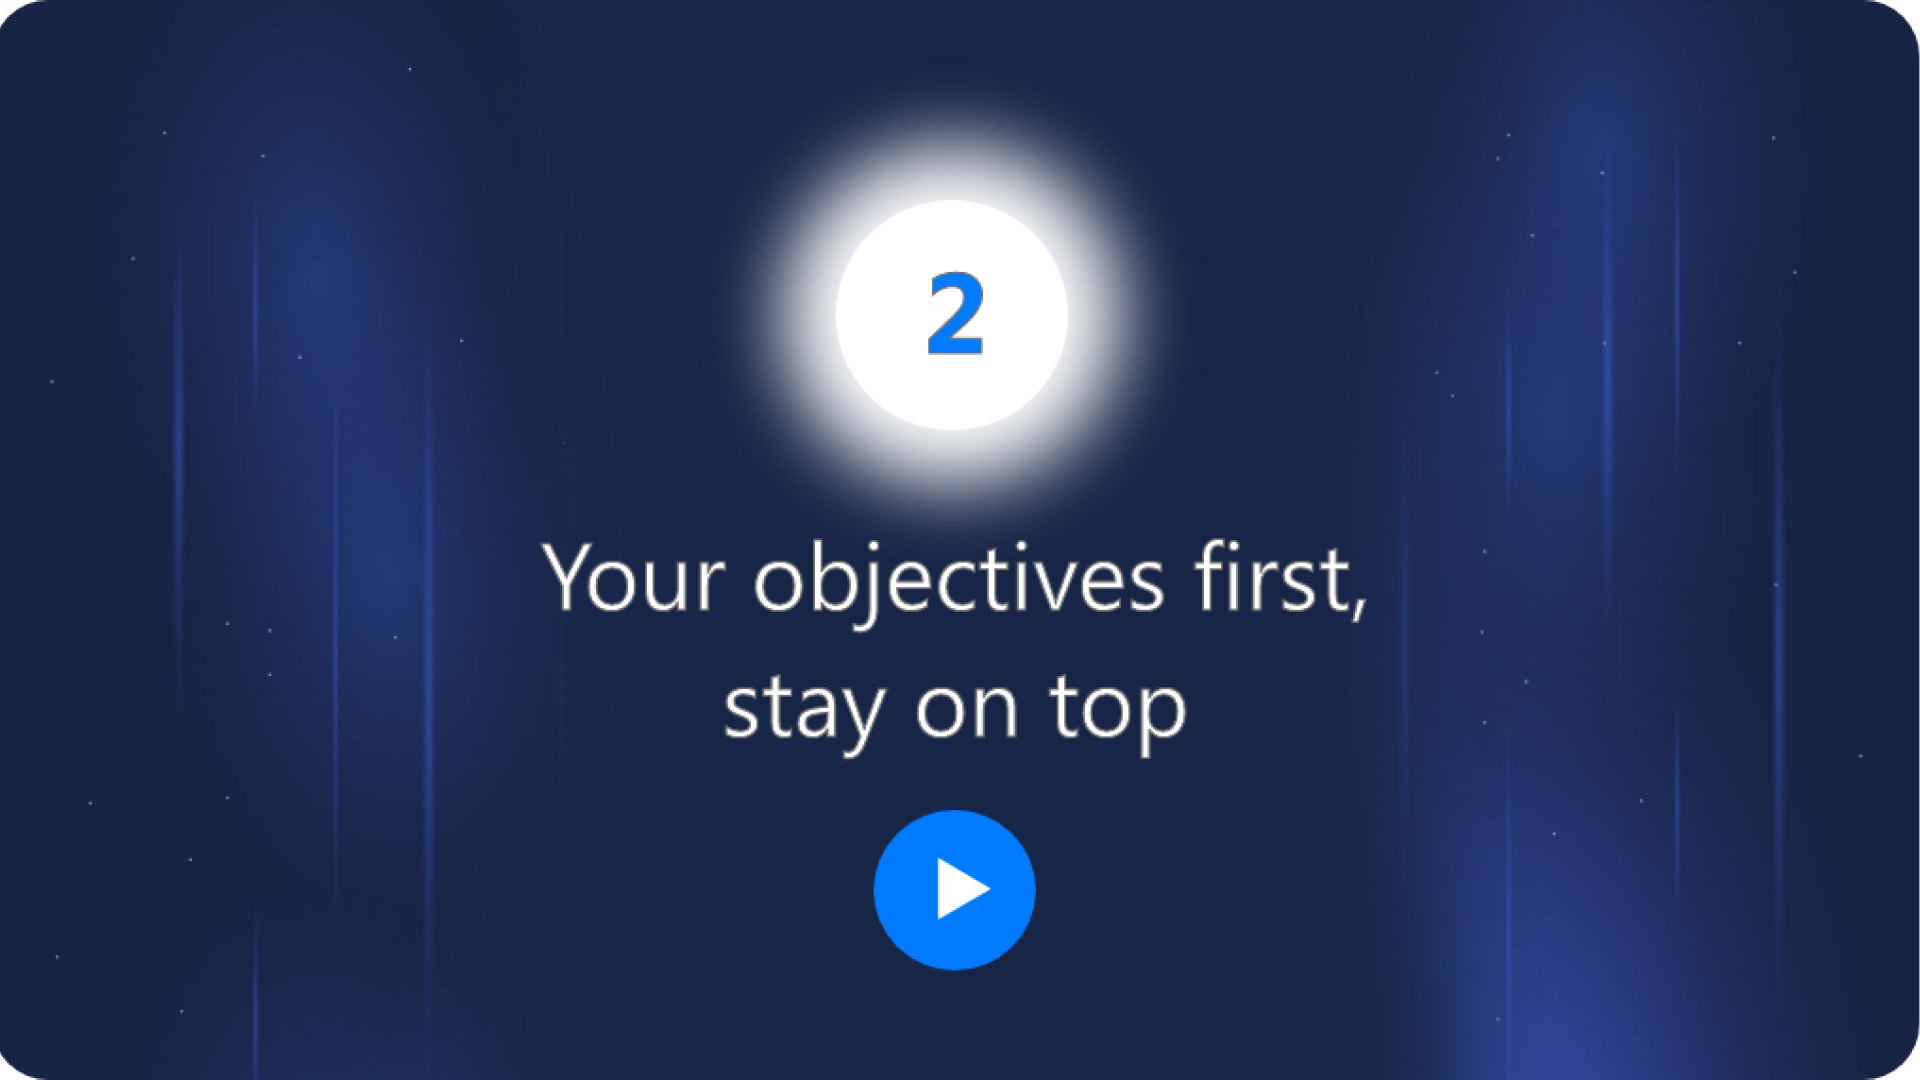 Your objectives first, stay on top